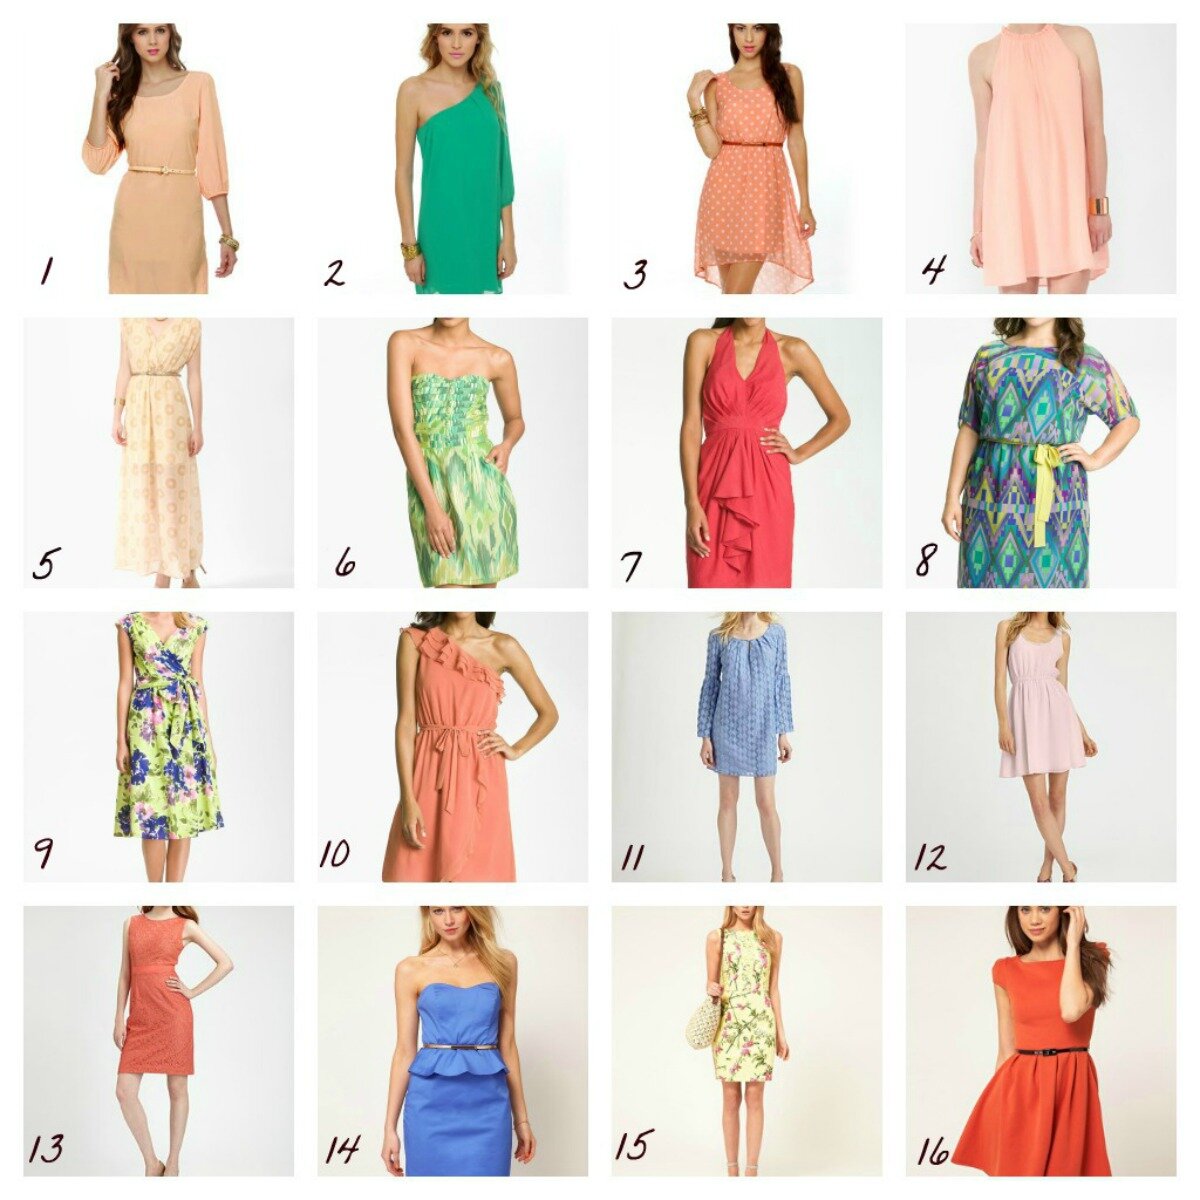 Spring dresses to wear to a wedding Photo - 1